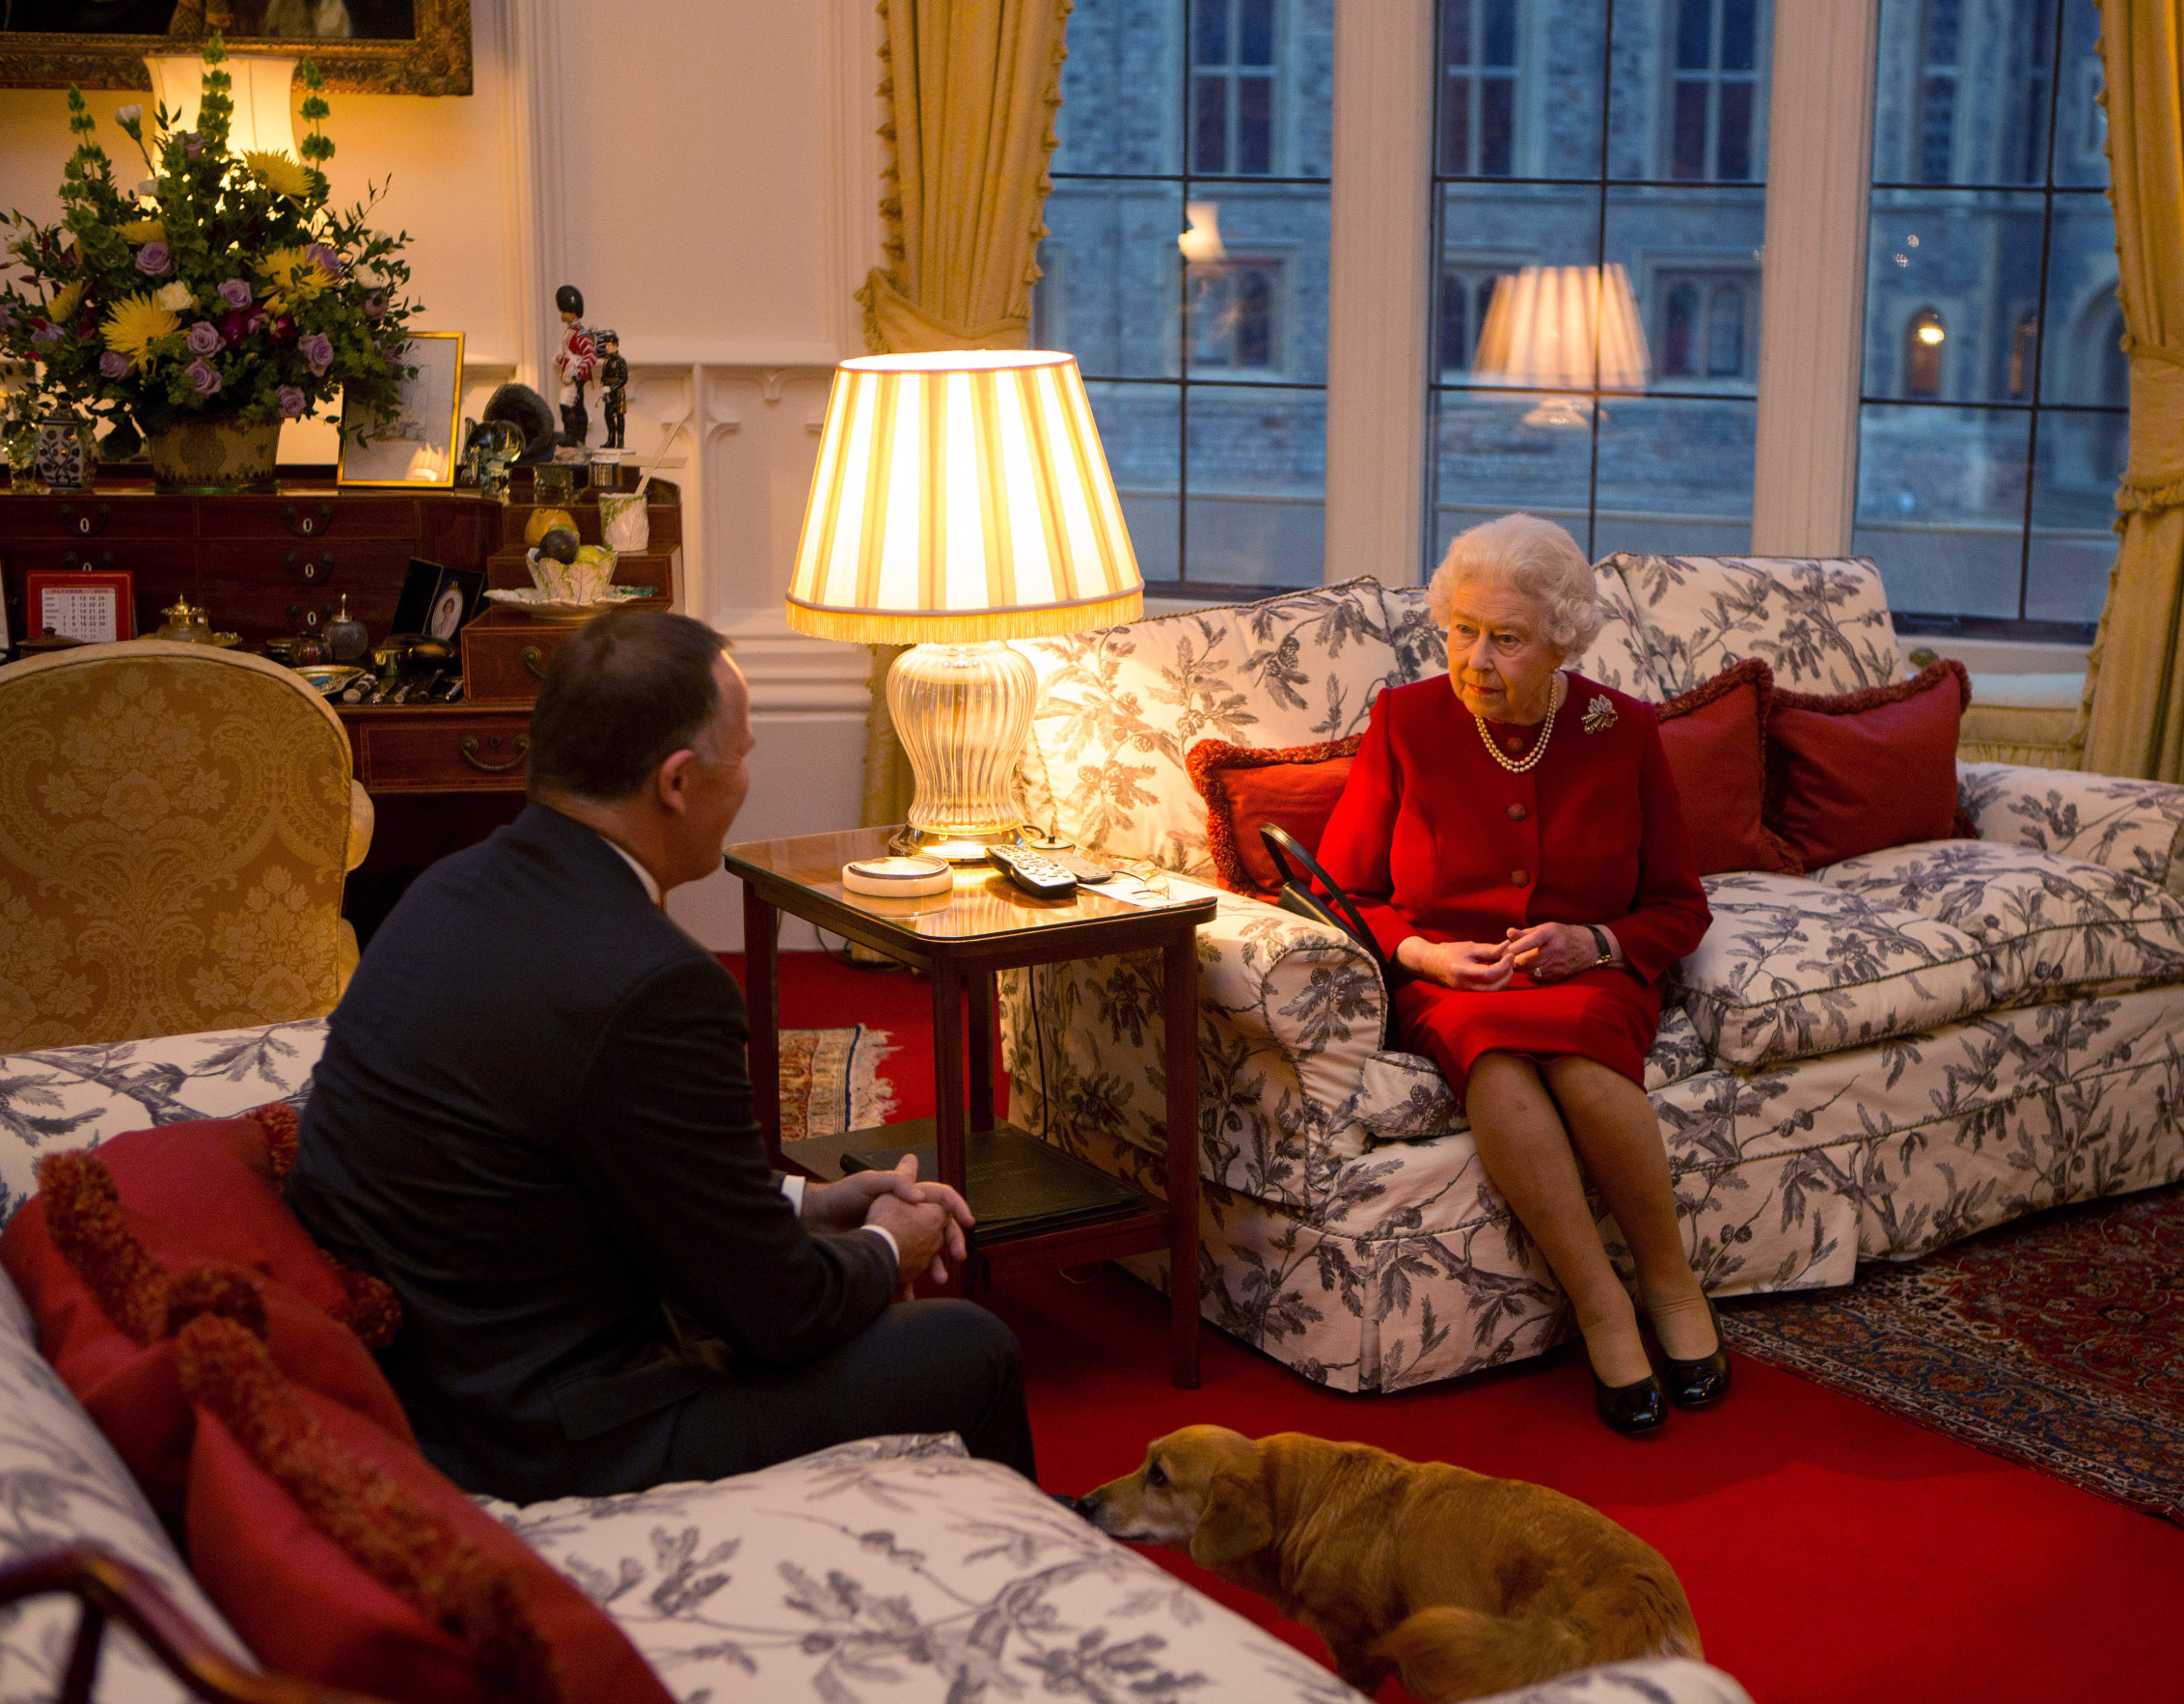 WINDSOR, ENGLAND - OCTOBER 30: Queen Elizabeth II speaks with Prime Minister of New Zealand John Key at a audience held at Windsor Castle on October 29, 2015 in Windsor, England. (Photo by Steve Parsons - WPA Pool/Getty Images)